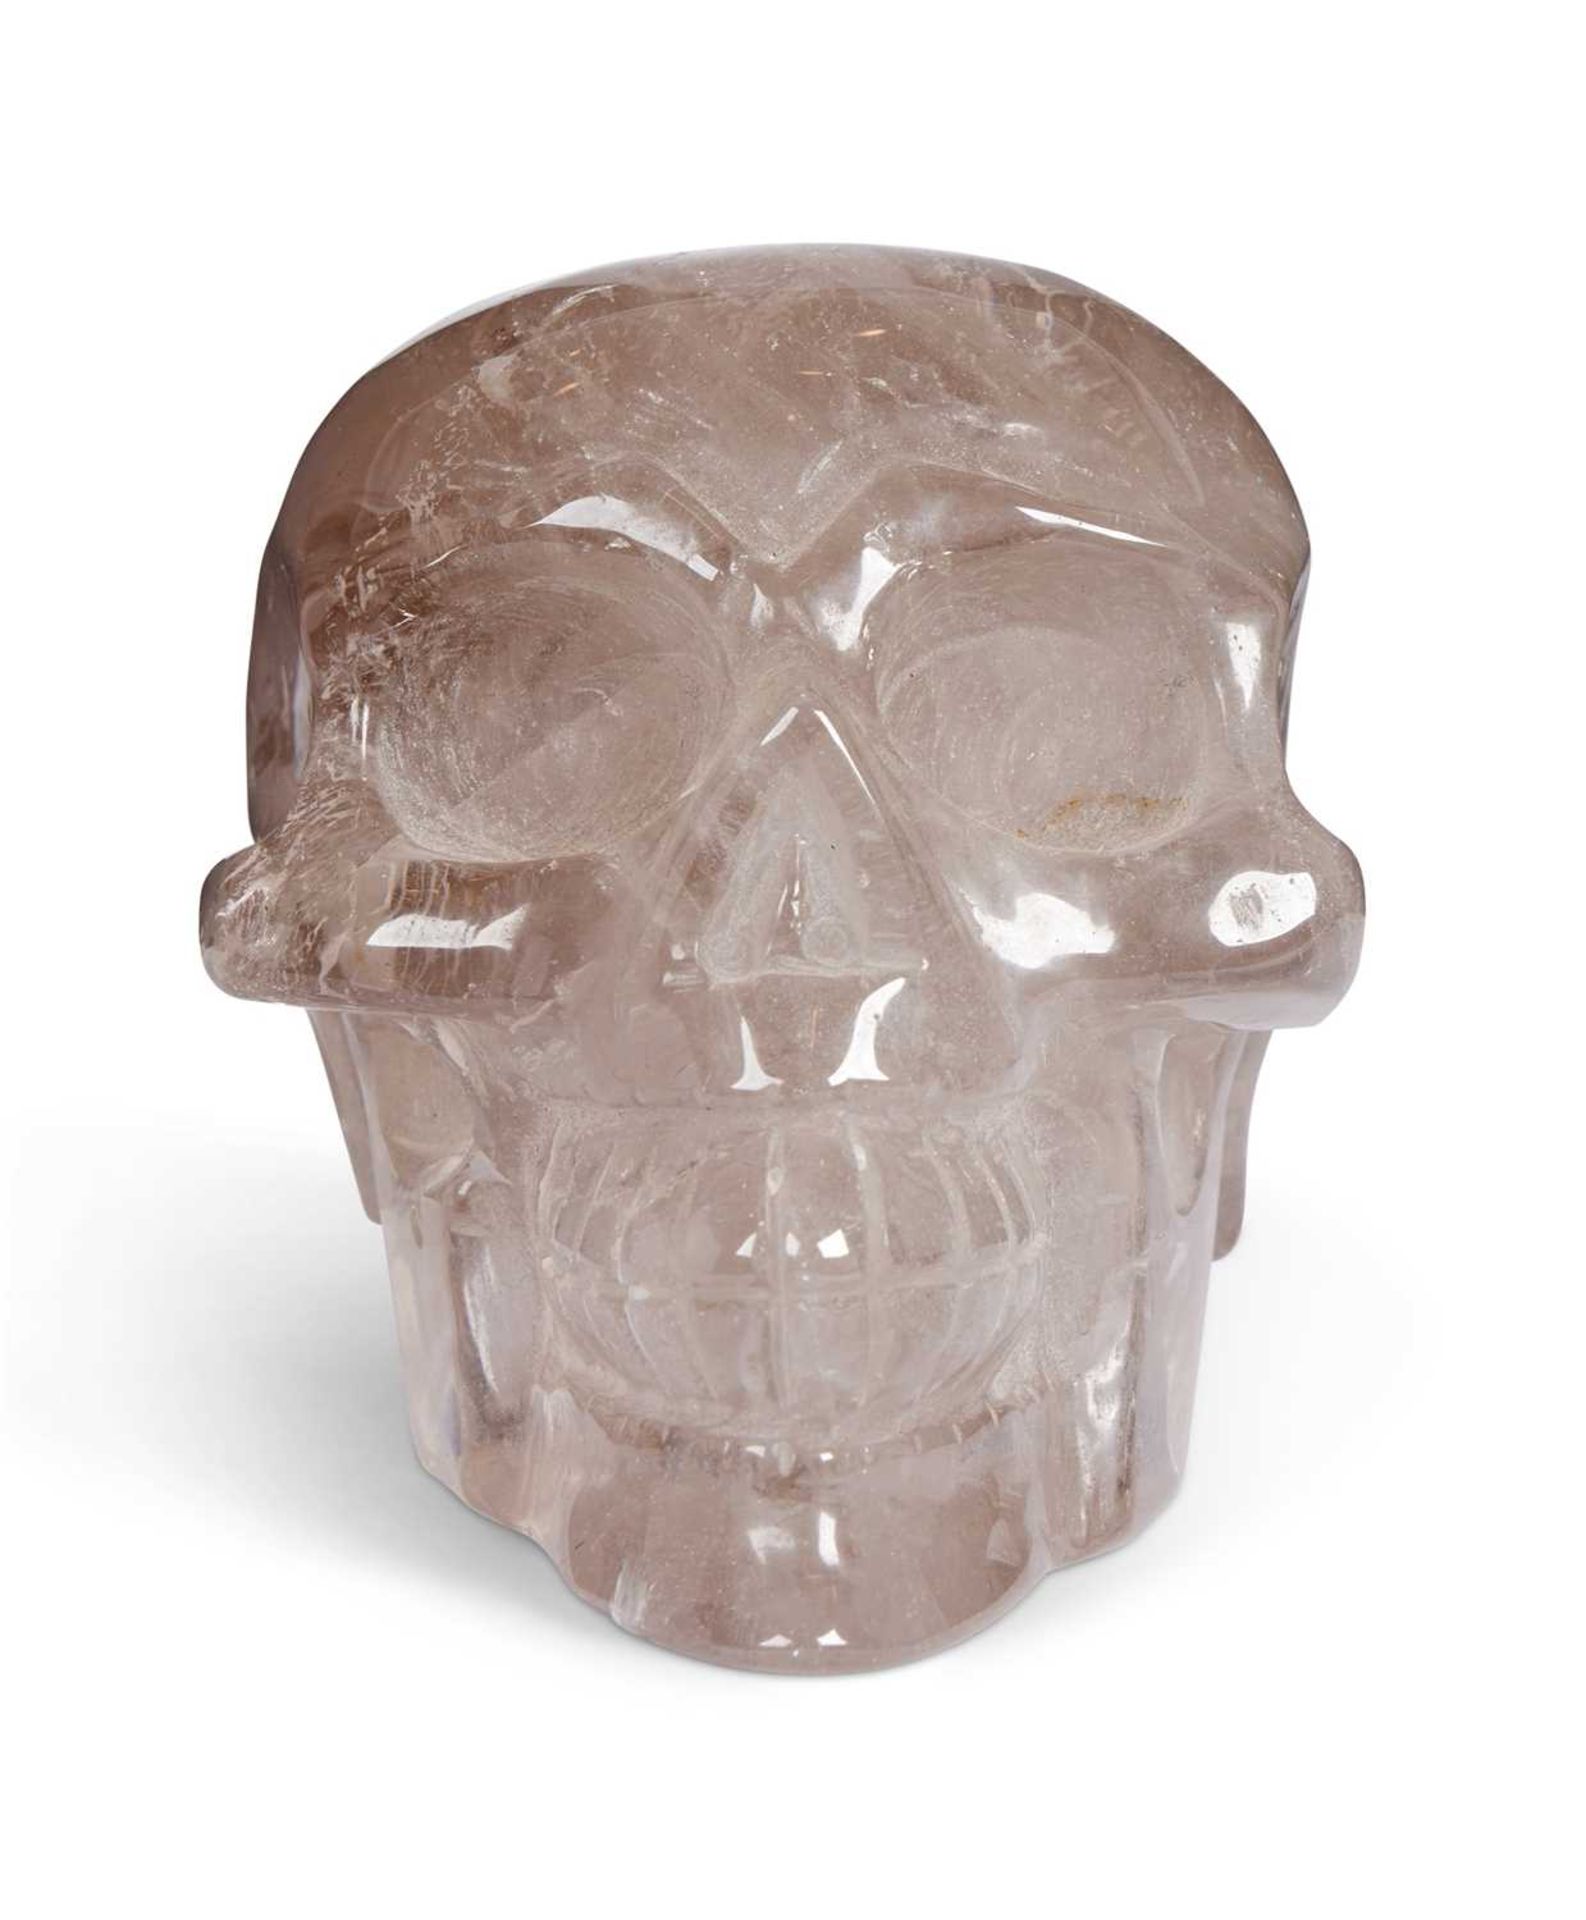 A SOLID CARVED ROCK CRYSTAL MODEL OF A HUMAN SKULL - Image 2 of 2